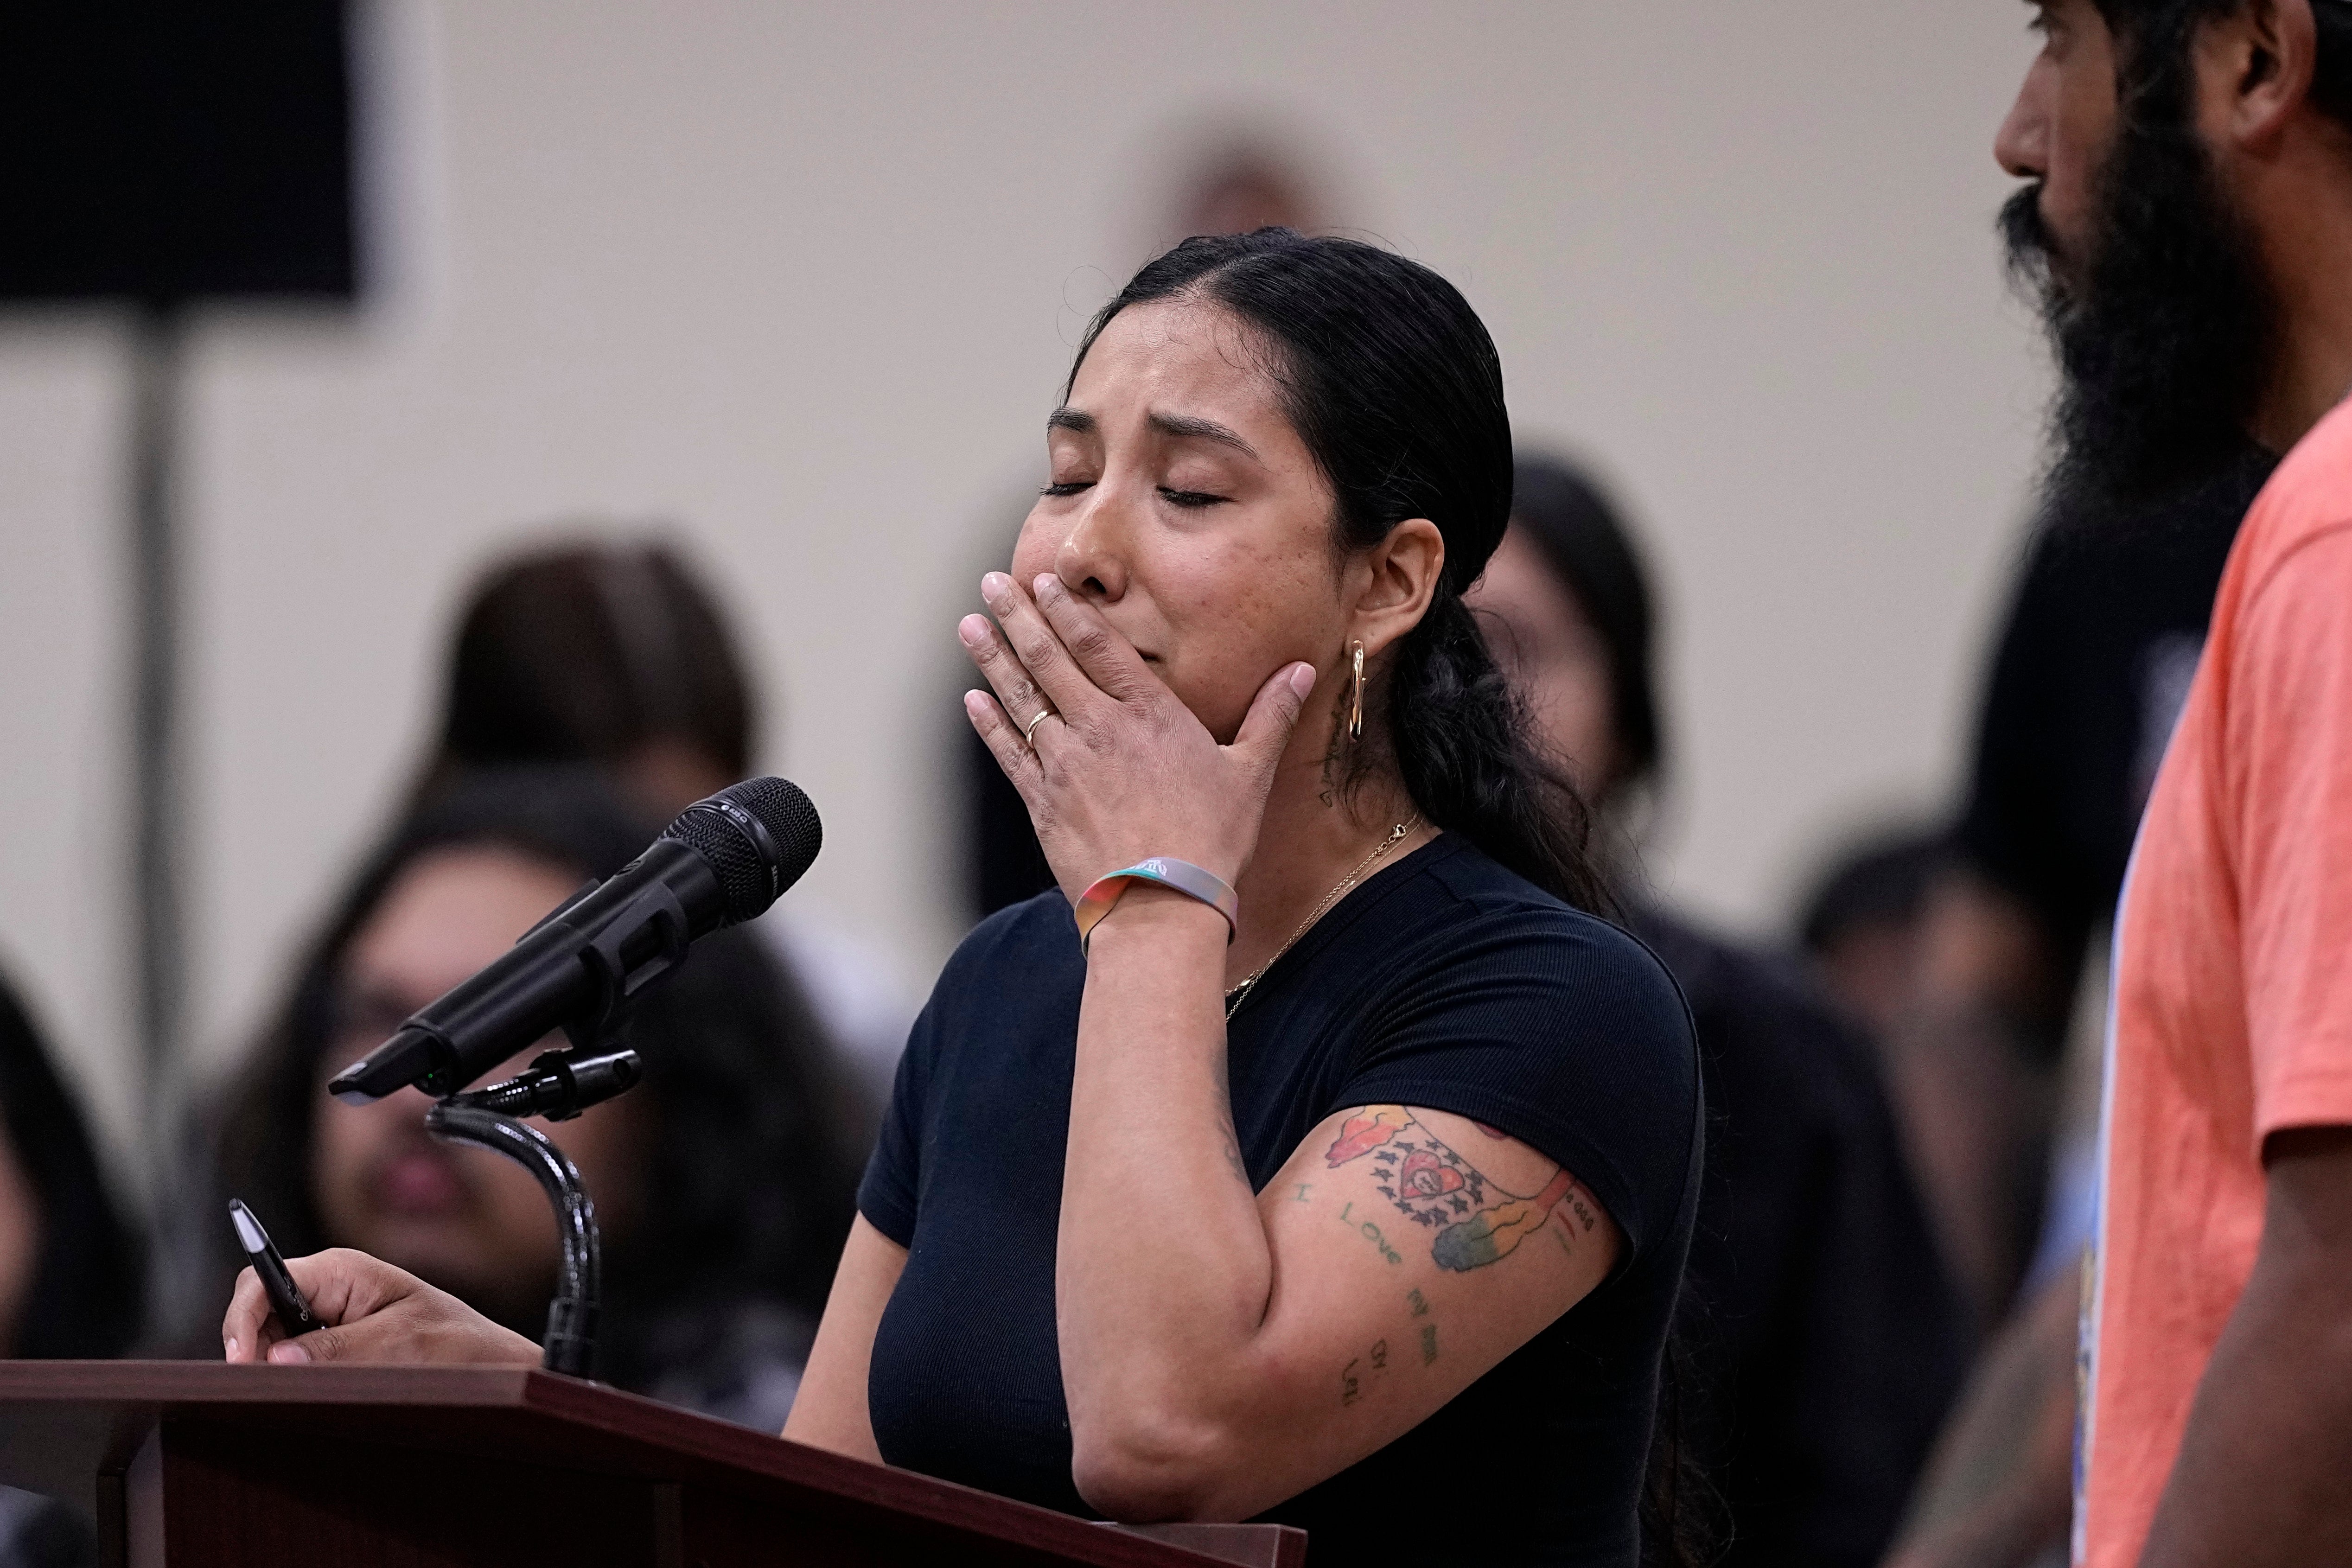 Kimberly Rubio, who’s daughter Lexi was among 19 children killed in the massacre at Robb Elementary, speaks at a special city council meeting in Uvalde, Texas, 7 March 2024